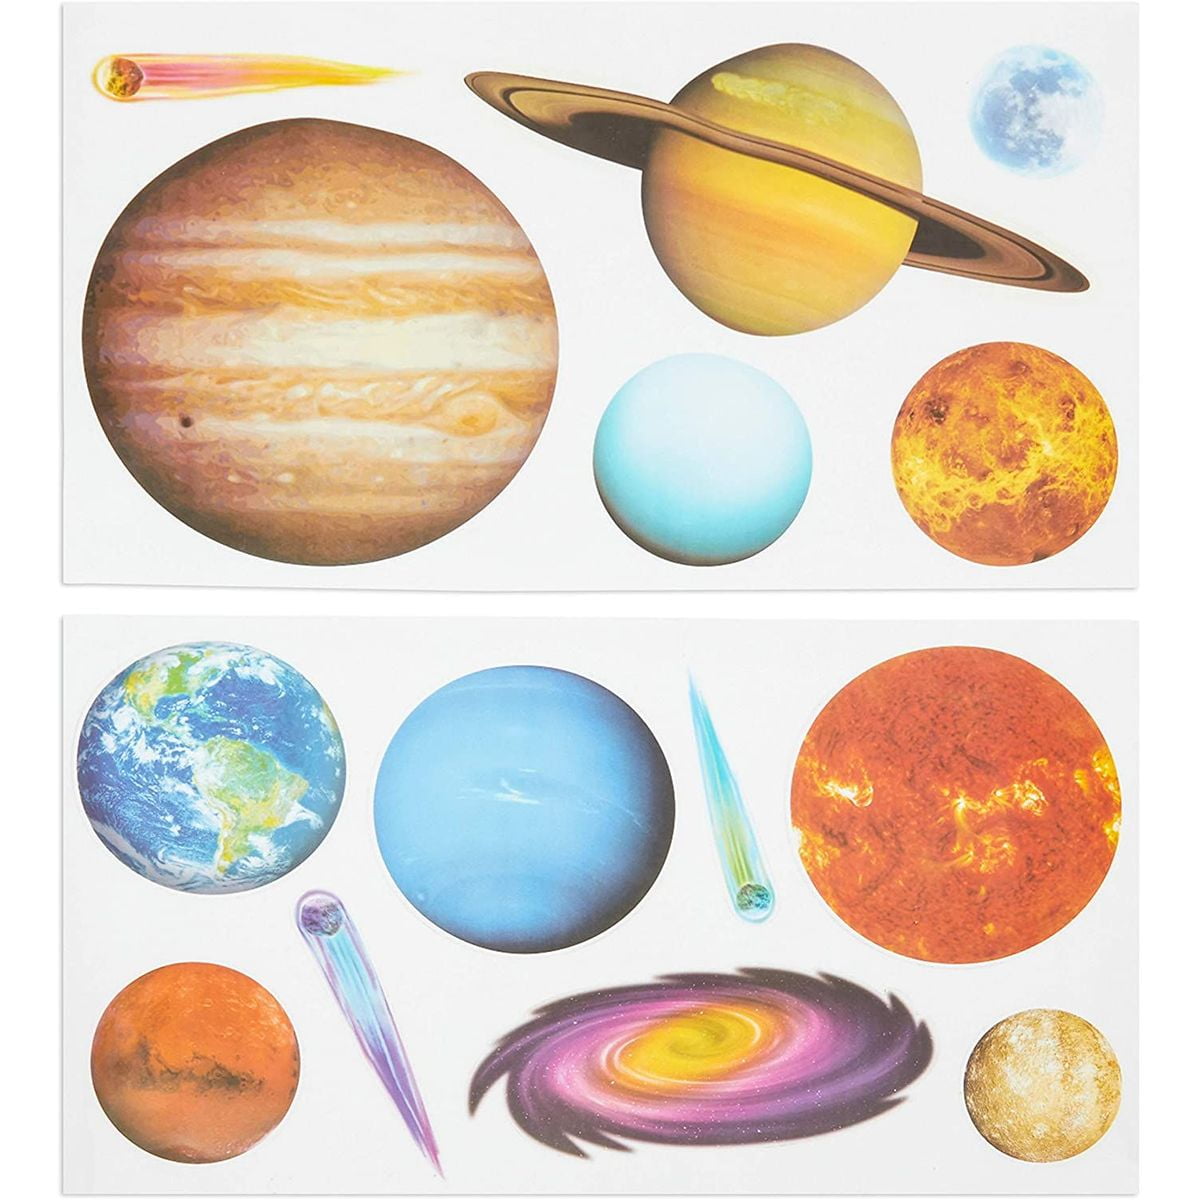 Solar system Wall decal Sticker science space planets home decor children learn